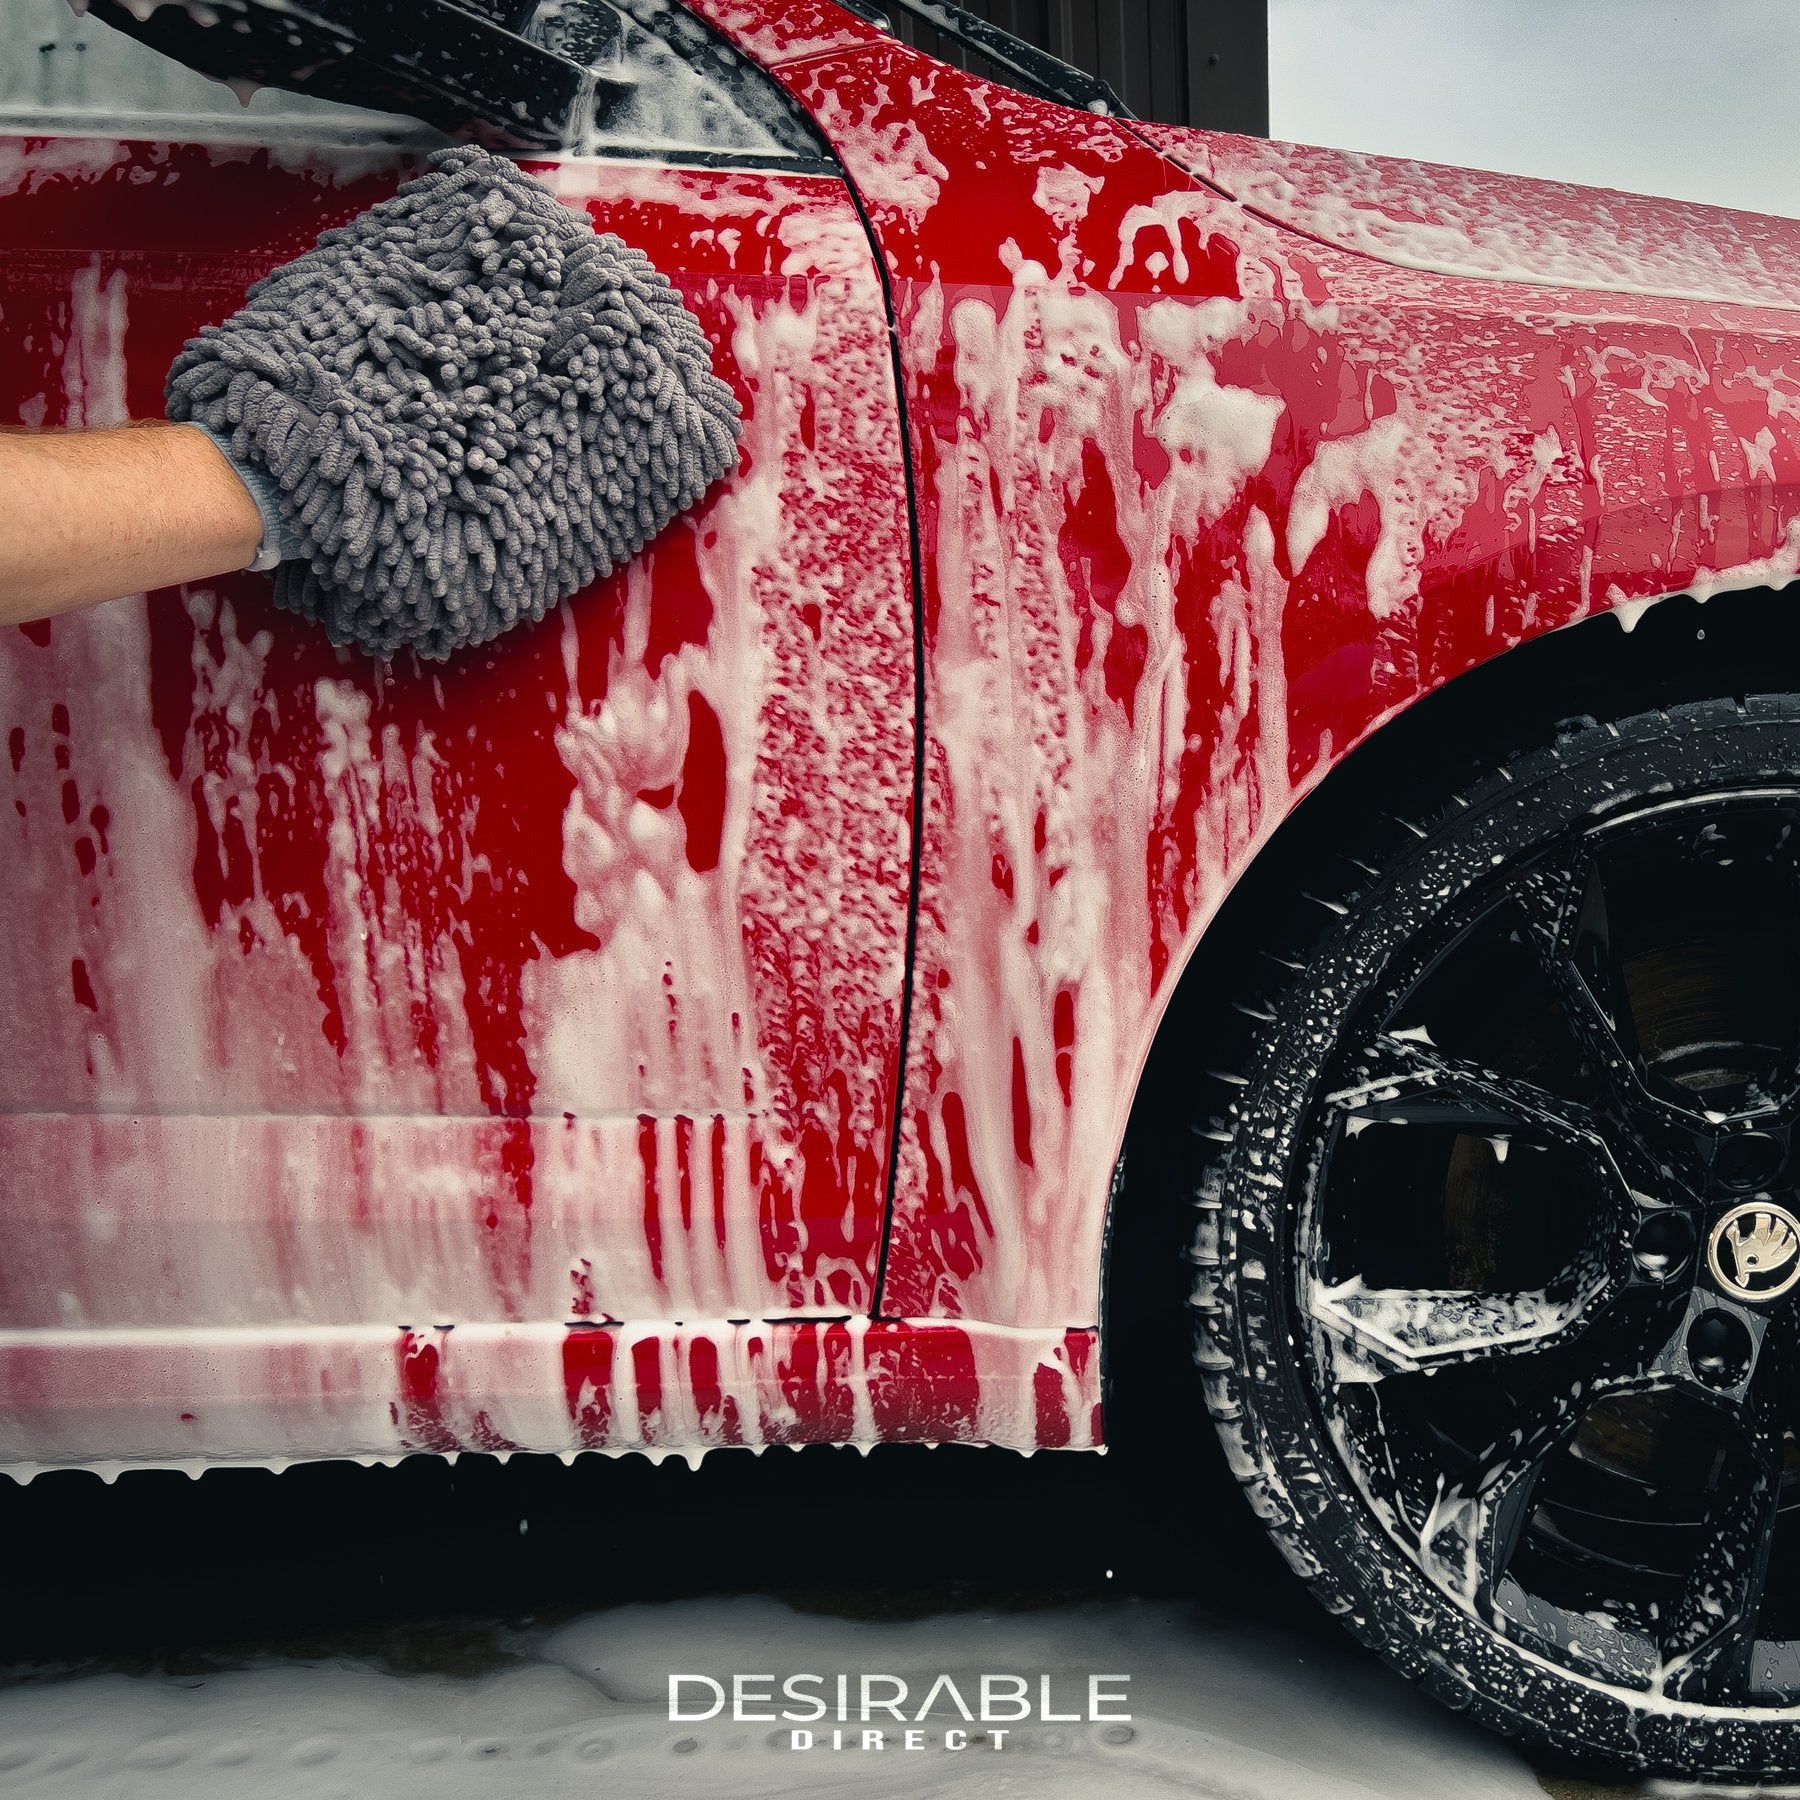 Car care noodle chenille grey wash mitt cleaning the side of a red car with black wheels covered in car shampoo.